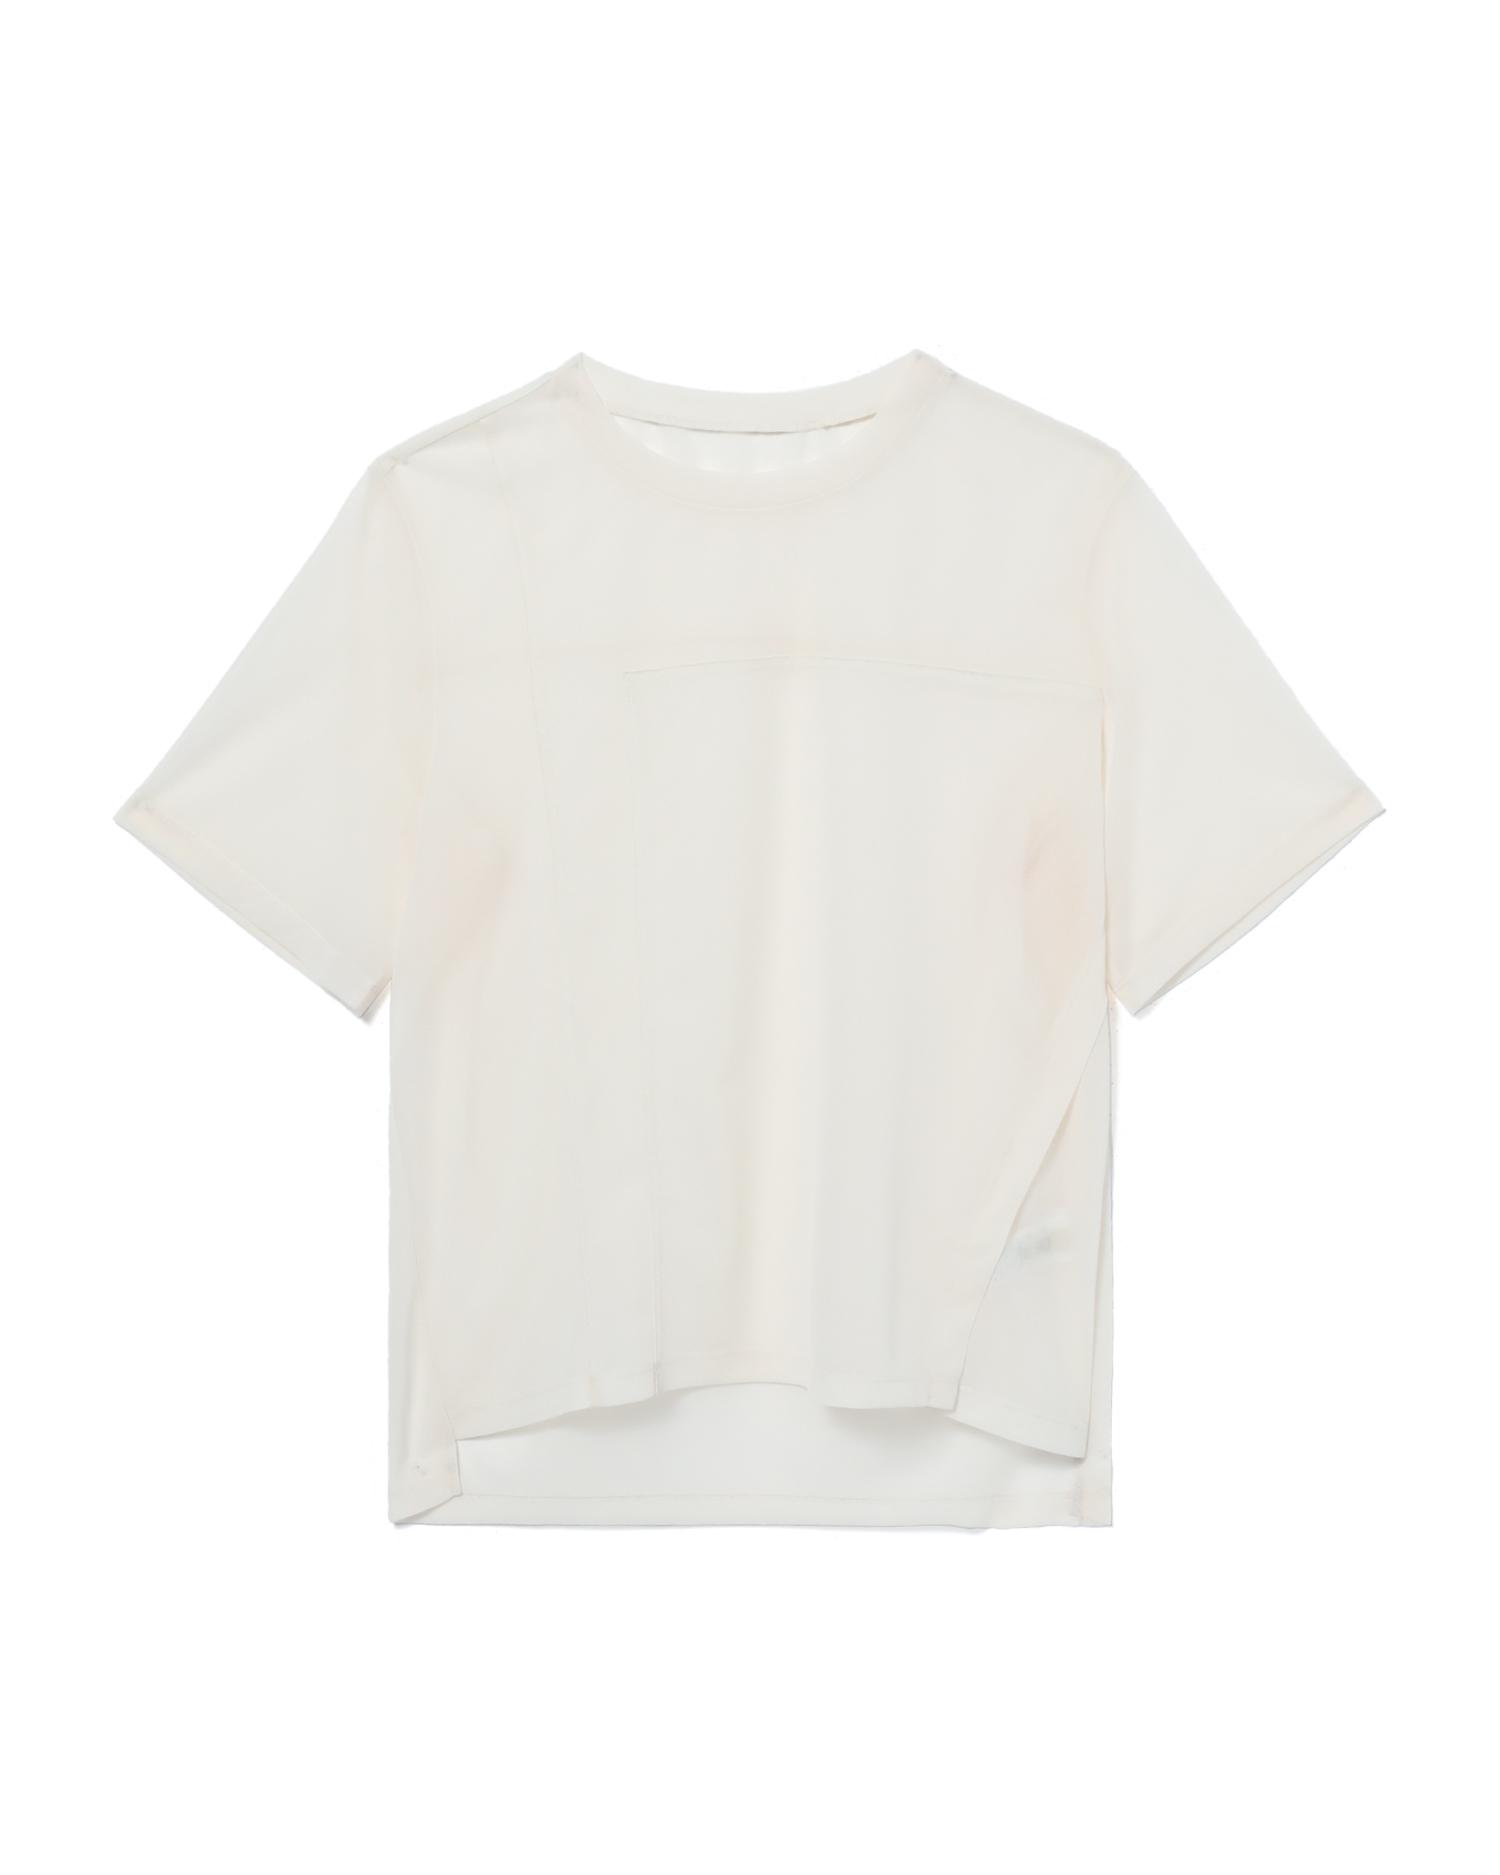 Panelled tee. by D'DEMOO